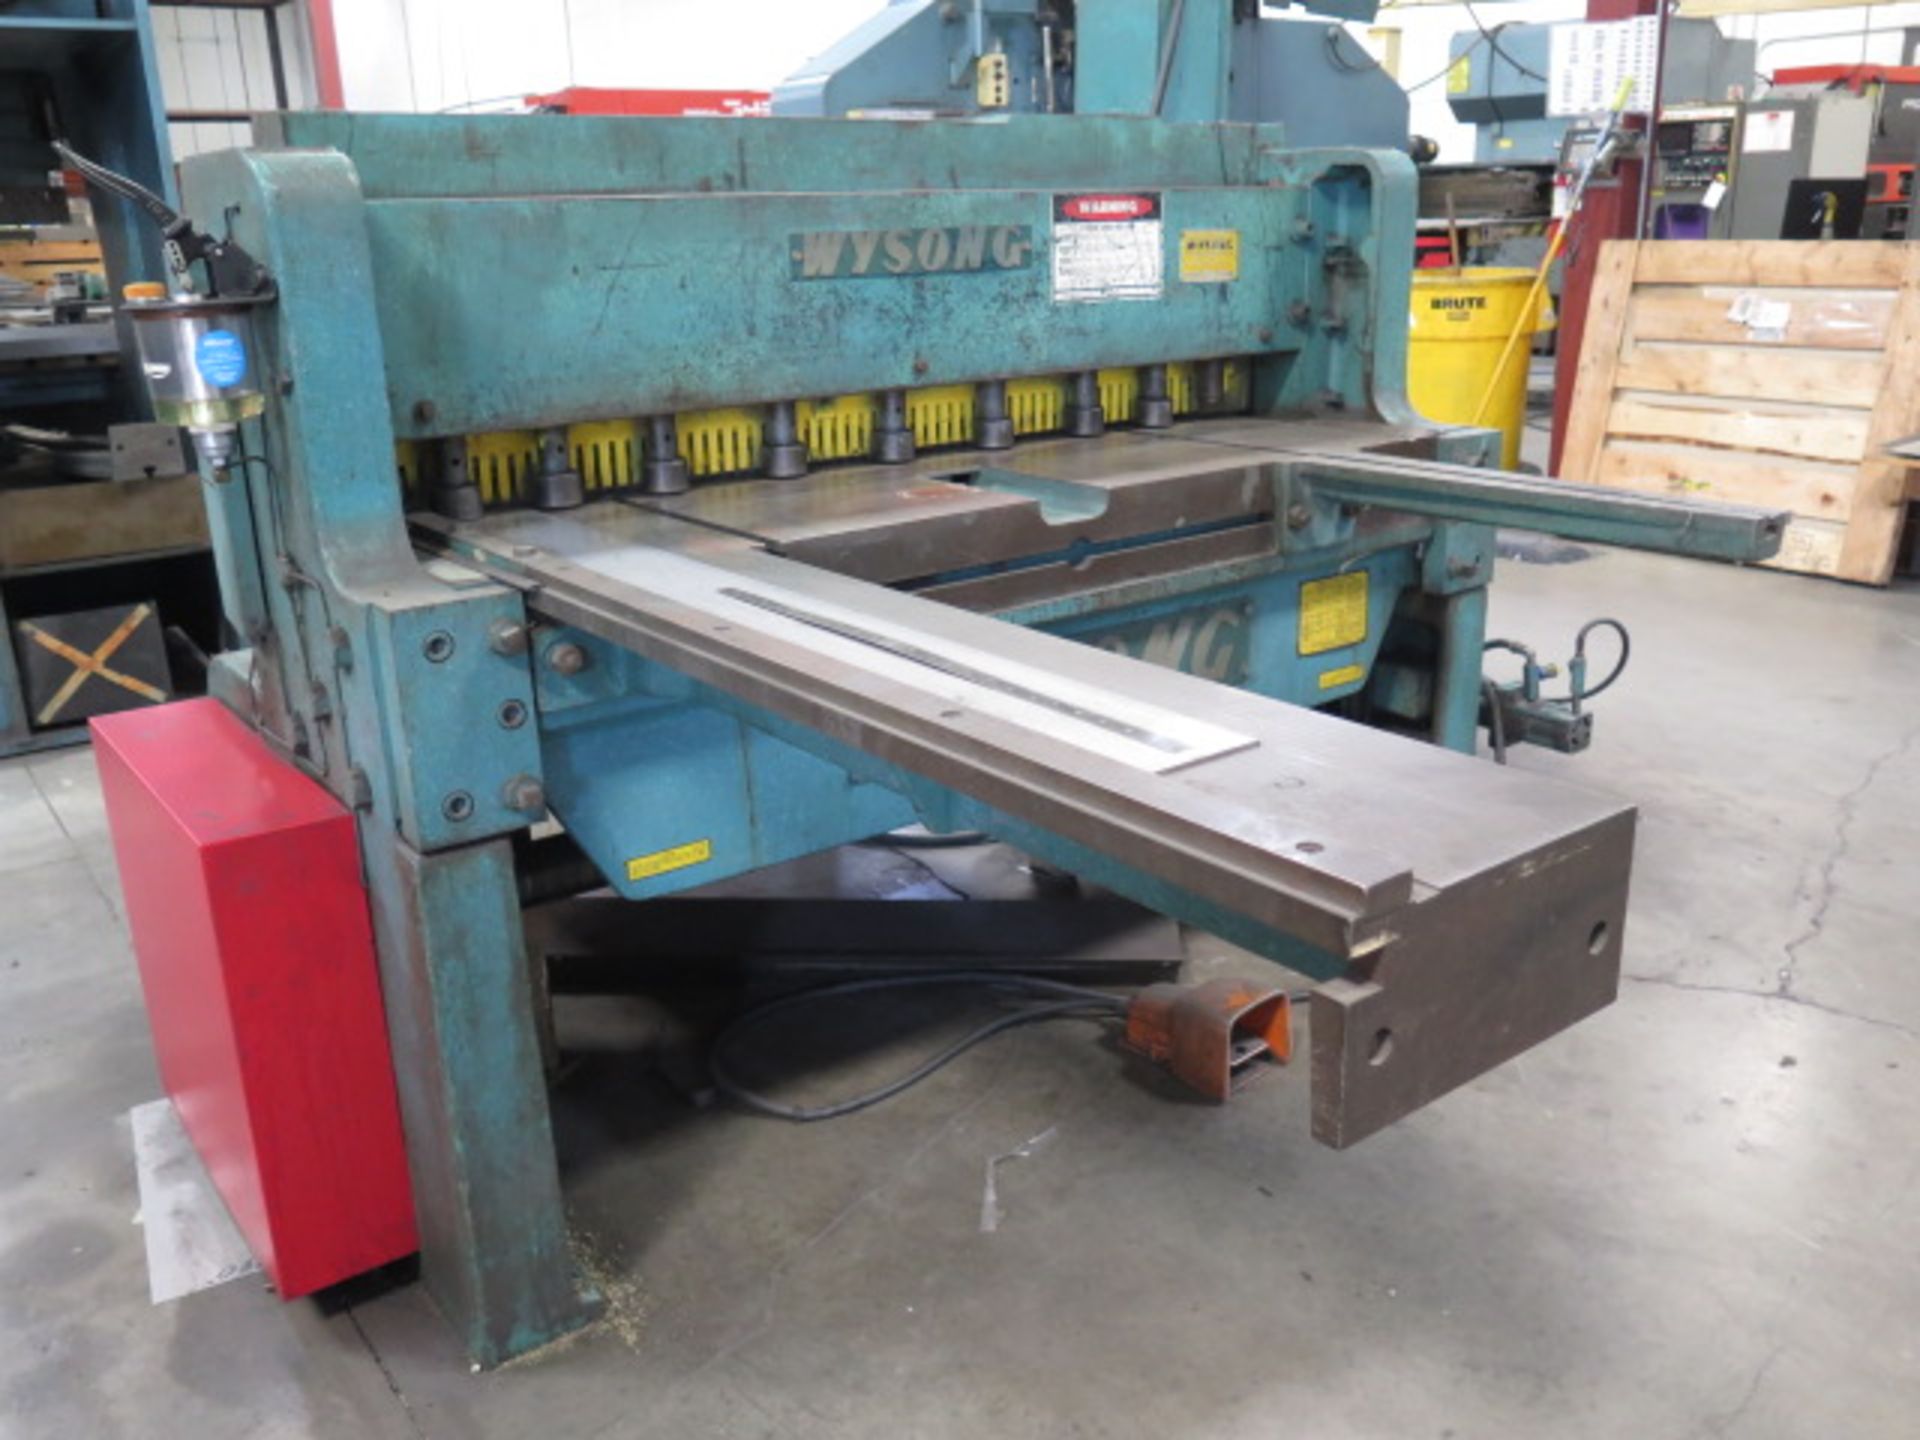 Wysong mdl. 1052 10GA x 52” Power Shear s/n P58-208 w/ 56” Squaring Arm, Front Supports SOLD AS IS - Image 3 of 10